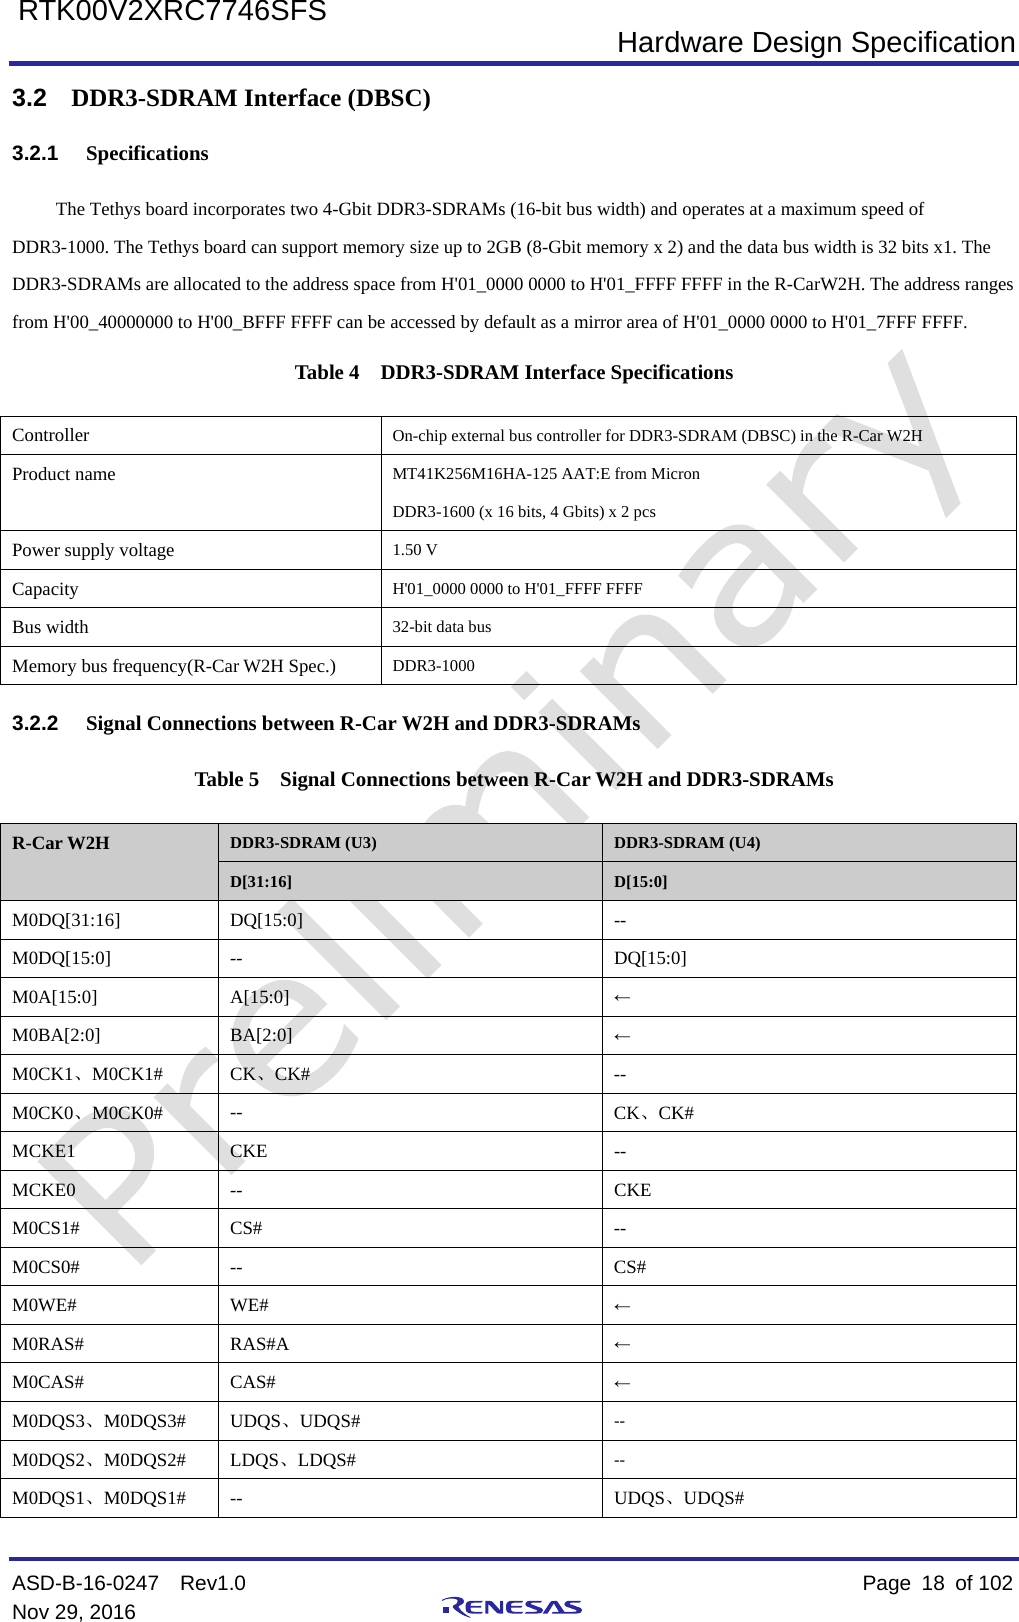  Hardware Design Specification ASD-B-16-0247  Rev1.0    Page  18 of 102 Nov 29, 2016     RTK00V2XRC7746SFS 3.2 DDR3-SDRAM Interface (DBSC) 3.2.1 Specifications The Tethys board incorporates two 4-Gbit DDR3-SDRAMs (16-bit bus width) and operates at a maximum speed of DDR3-1000. The Tethys board can support memory size up to 2GB (8-Gbit memory x 2) and the data bus width is 32 bits x1. The DDR3-SDRAMs are allocated to the address space from H&apos;01_0000 0000 to H&apos;01_FFFF FFFF in the R-CarW2H. The address ranges from H&apos;00_40000000 to H&apos;00_BFFF FFFF can be accessed by default as a mirror area of H&apos;01_0000 0000 to H&apos;01_7FFF FFFF. Table 4  DDR3-SDRAM Interface Specifications Controller  On-chip external bus controller for DDR3-SDRAM (DBSC) in the R-Car W2H Product name MT41K256M16HA-125 AAT:E from Micron   DDR3-1600 (x 16 bits, 4 Gbits) x 2 pcs   Power supply voltage 1.50 V Capacity H&apos;01_0000 0000 to H&apos;01_FFFF FFFF Bus width 32-bit data bus Memory bus frequency(R-Car W2H Spec.) DDR3-1000 3.2.2 Signal Connections between R-Car W2H and DDR3-SDRAMs Table 5  Signal Connections between R-Car W2H and DDR3-SDRAMs R-Car W2H DDR3-SDRAM (U3) DDR3-SDRAM (U4) D[31:16] D[15:0] M0DQ[31:16]  DQ[15:0]  -- M0DQ[15:0]  --  DQ[15:0] M0A[15:0]  A[15:0]  ← M0BA[2:0]  BA[2:0]  ← M0CK1、M0CK1#  CK、CK# -- M0CK0、M0CK0# --  CK、CK# MCKE1 CKE  -- MCKE0  --  CKE M0CS1#  CS#  -- M0CS0#  --  CS# M0WE# WE# ← M0RAS# RAS#A  ← M0CAS# CAS# ← M0DQS3、M0DQS3# UDQS、UDQS# -- M0DQS2、M0DQS2# LDQS、LDQS# -- M0DQS1、M0DQS1# --  UDQS、UDQS# 